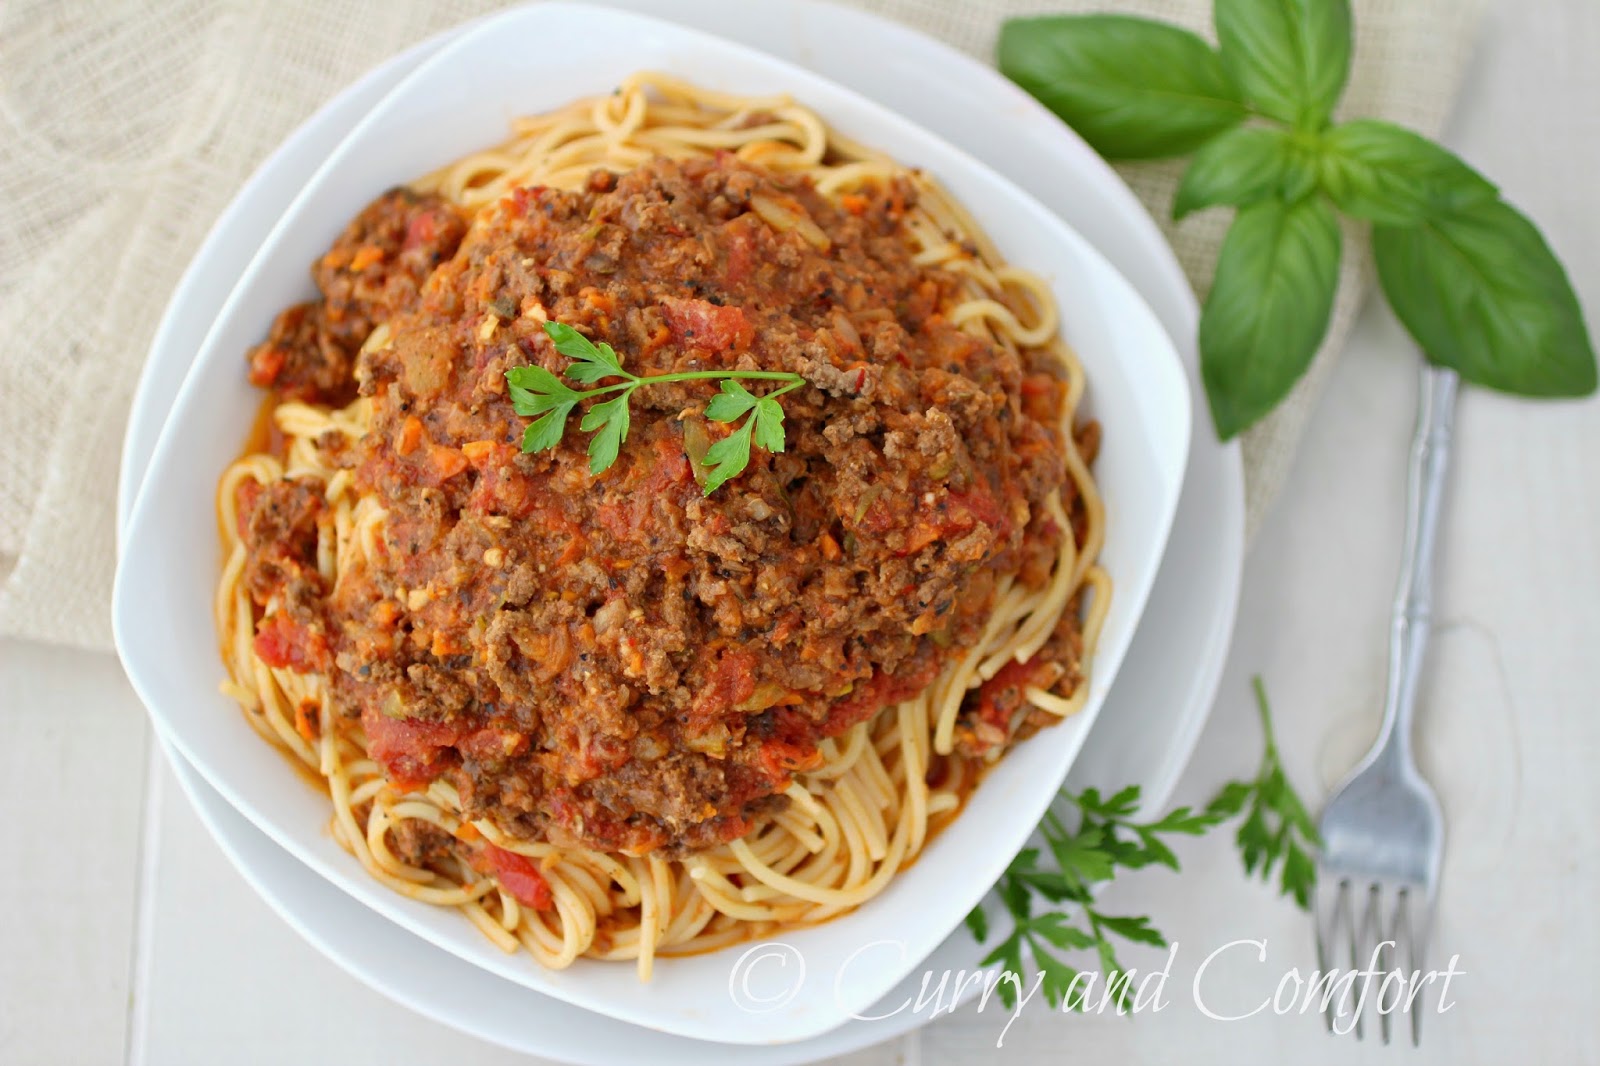   Beef and Mushroom Bolognese over Spaghetti Pasta 